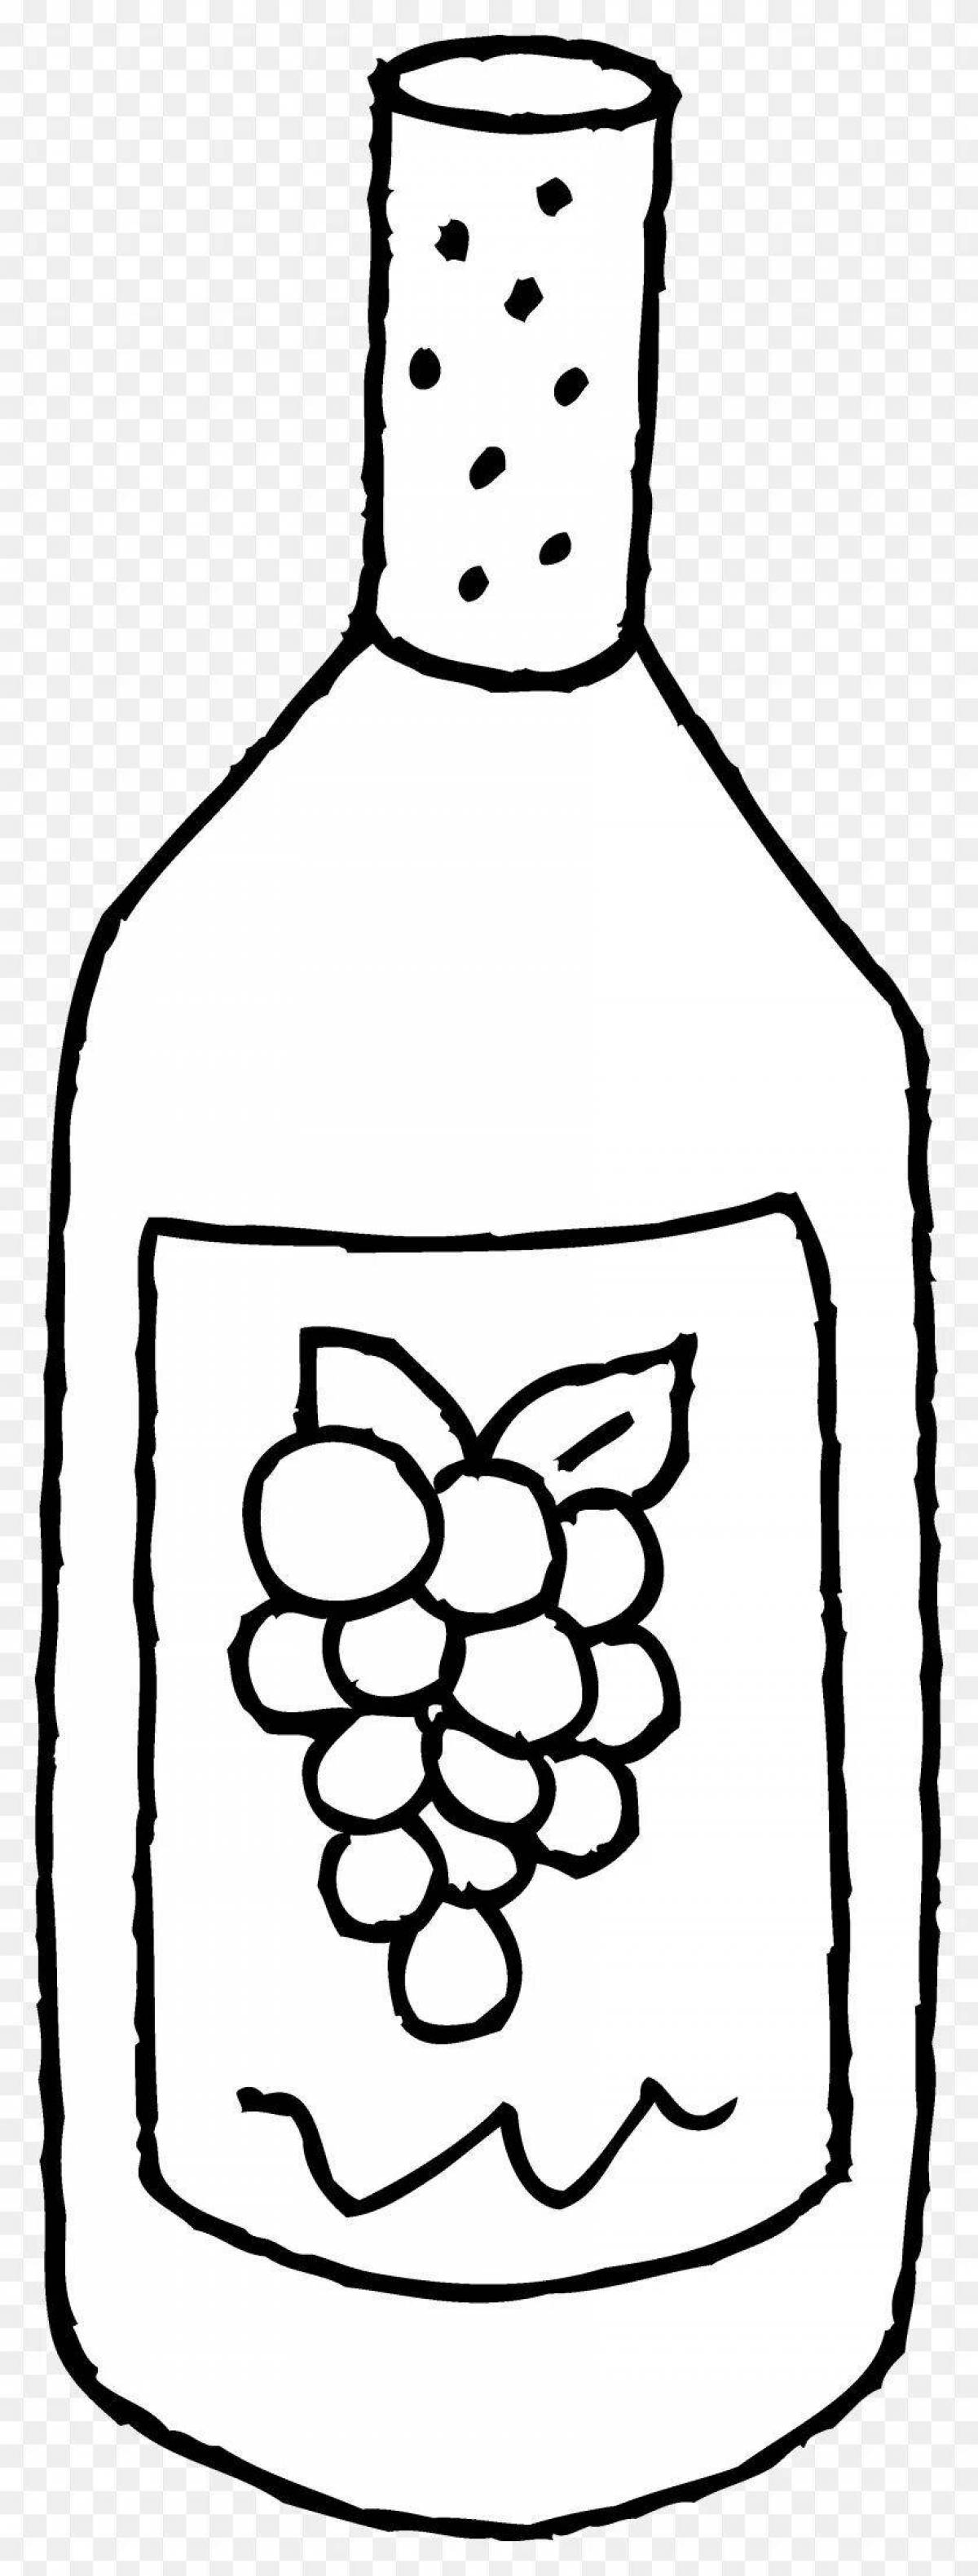 Coloring book shining bottle of wine